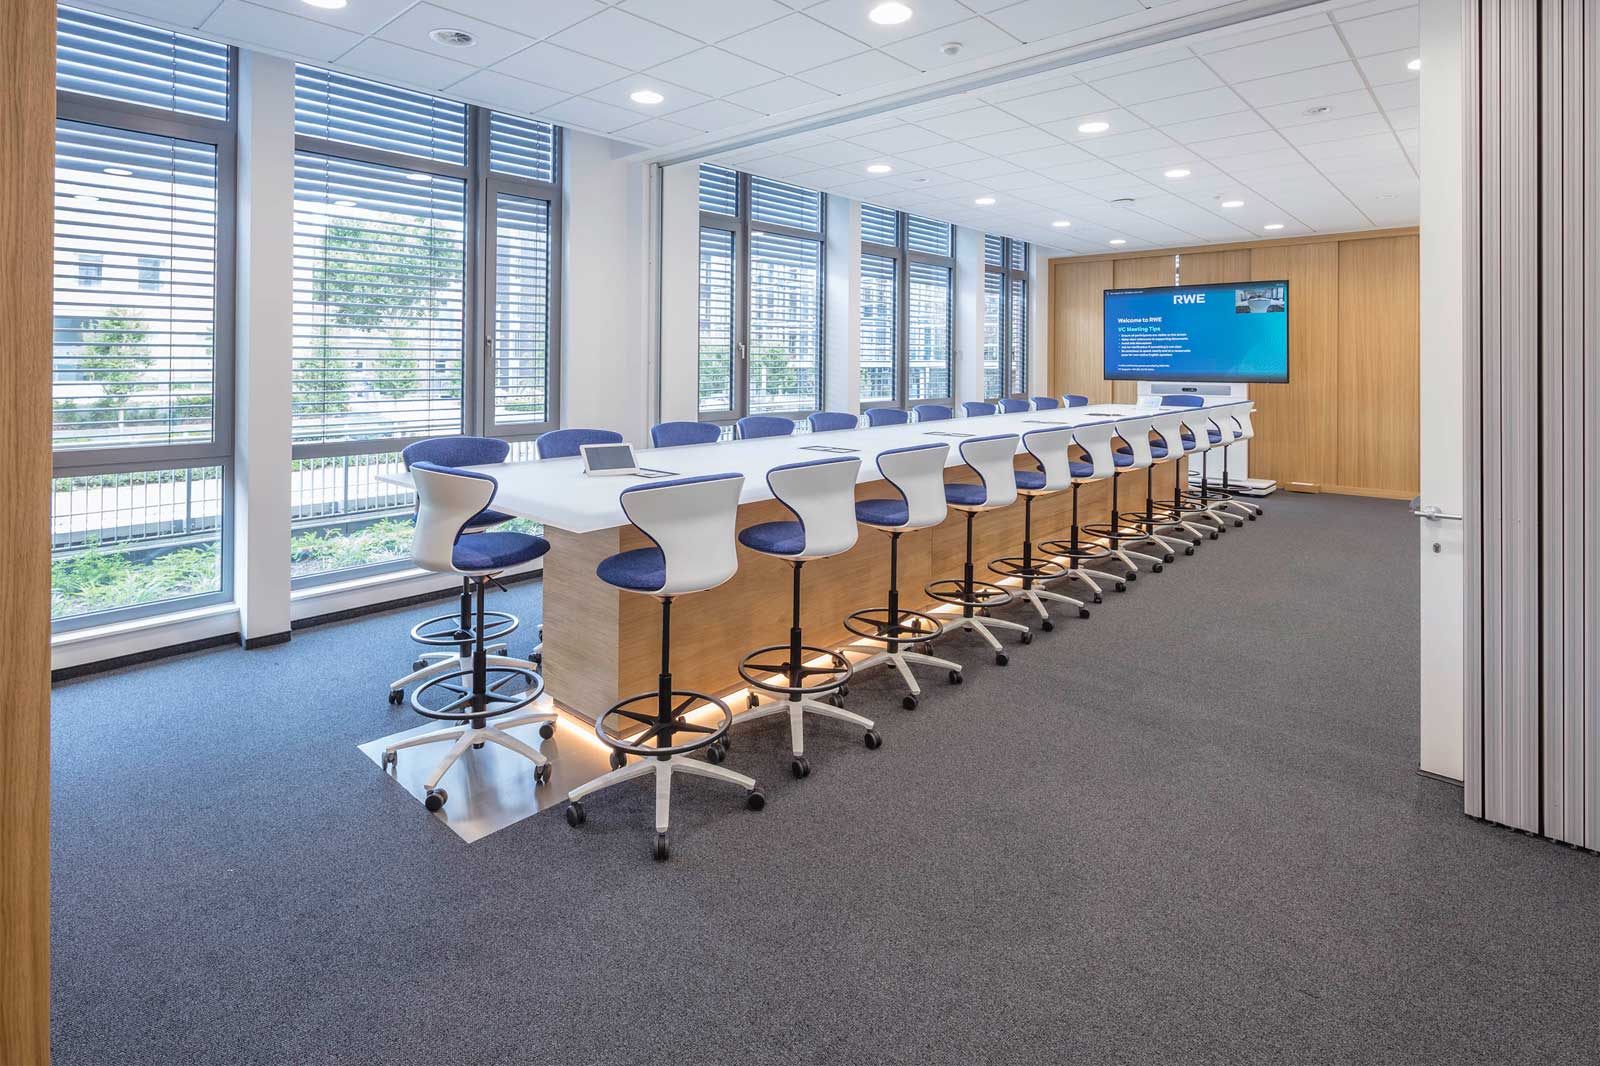 Conference room at RWE Campus in Essen